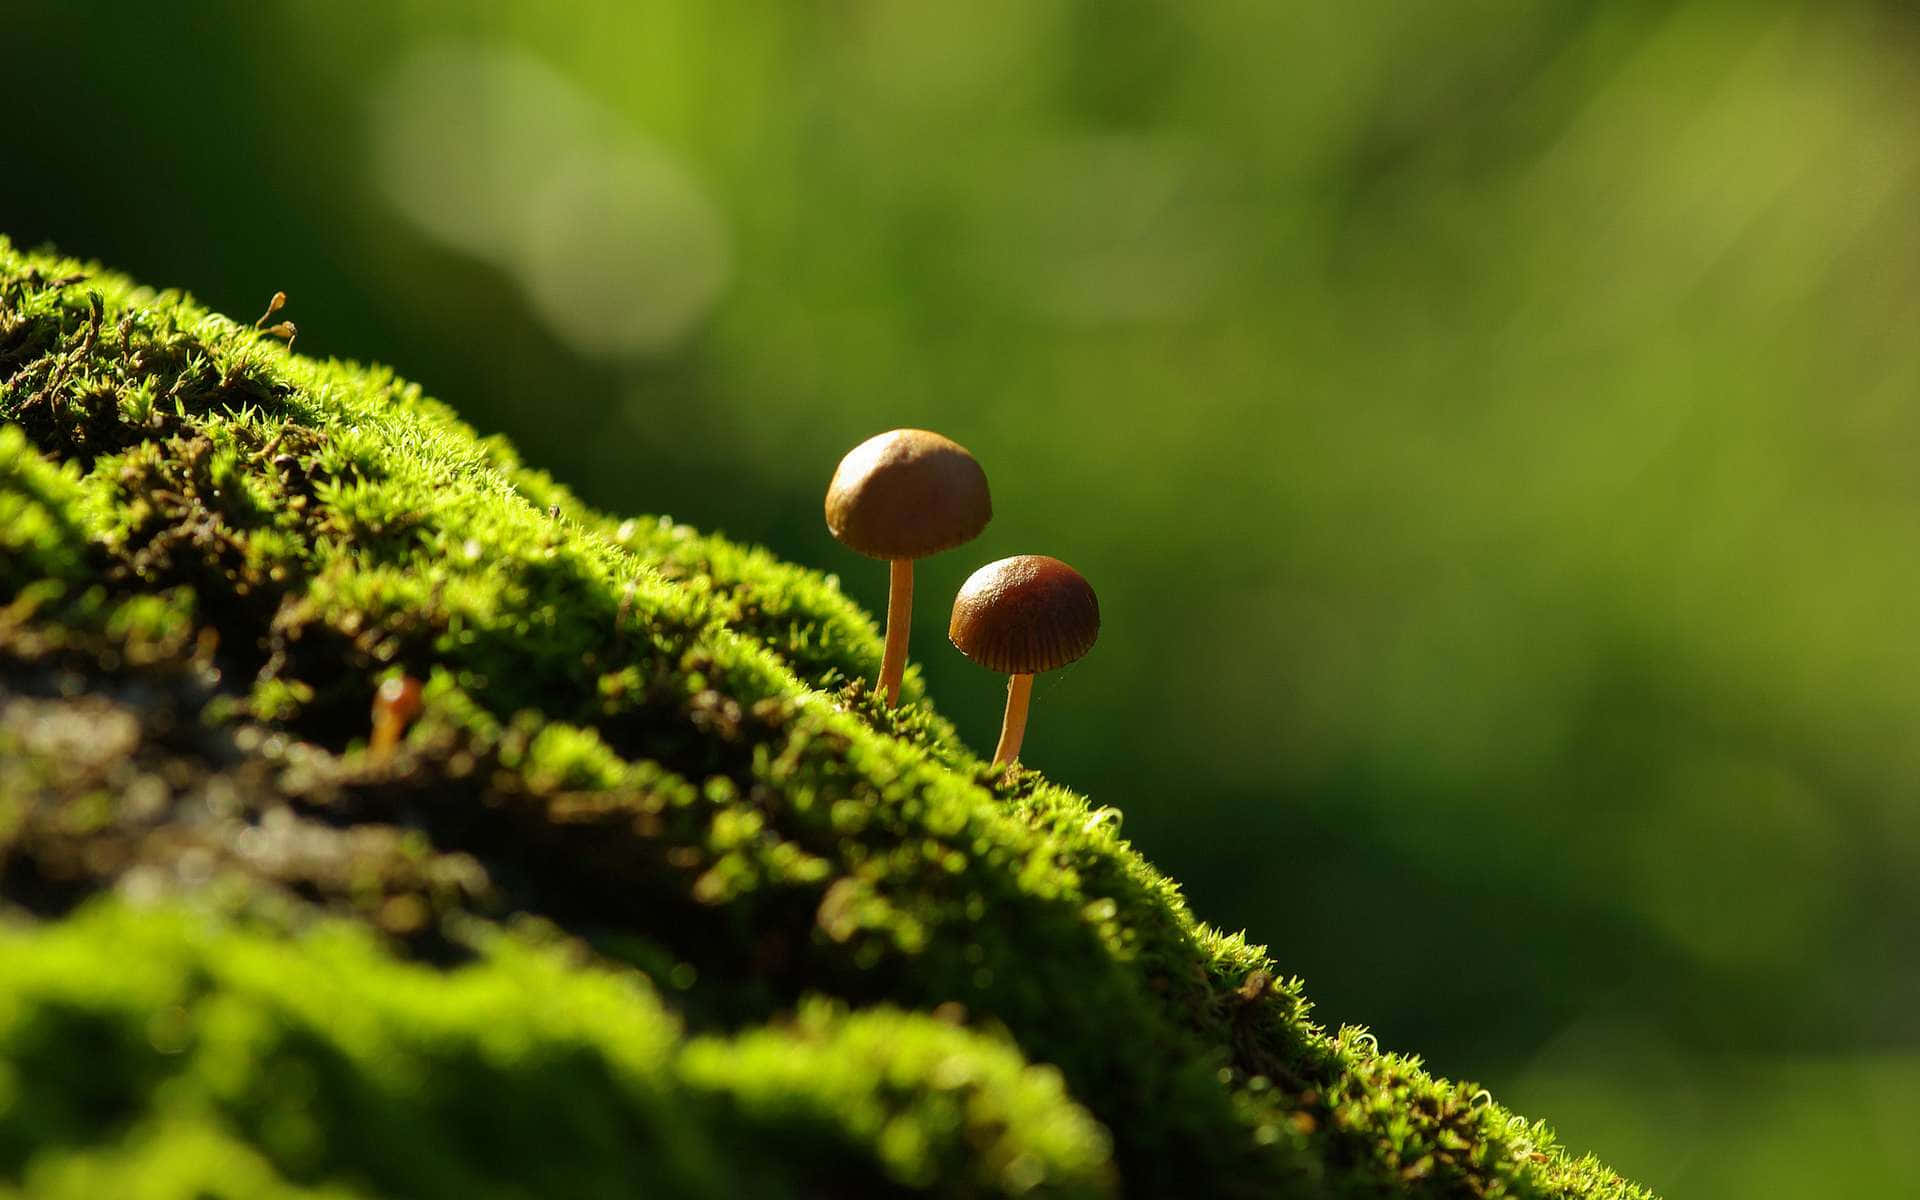 Enjoy the enchanting beauty of these vibrant mushrooms in nature!